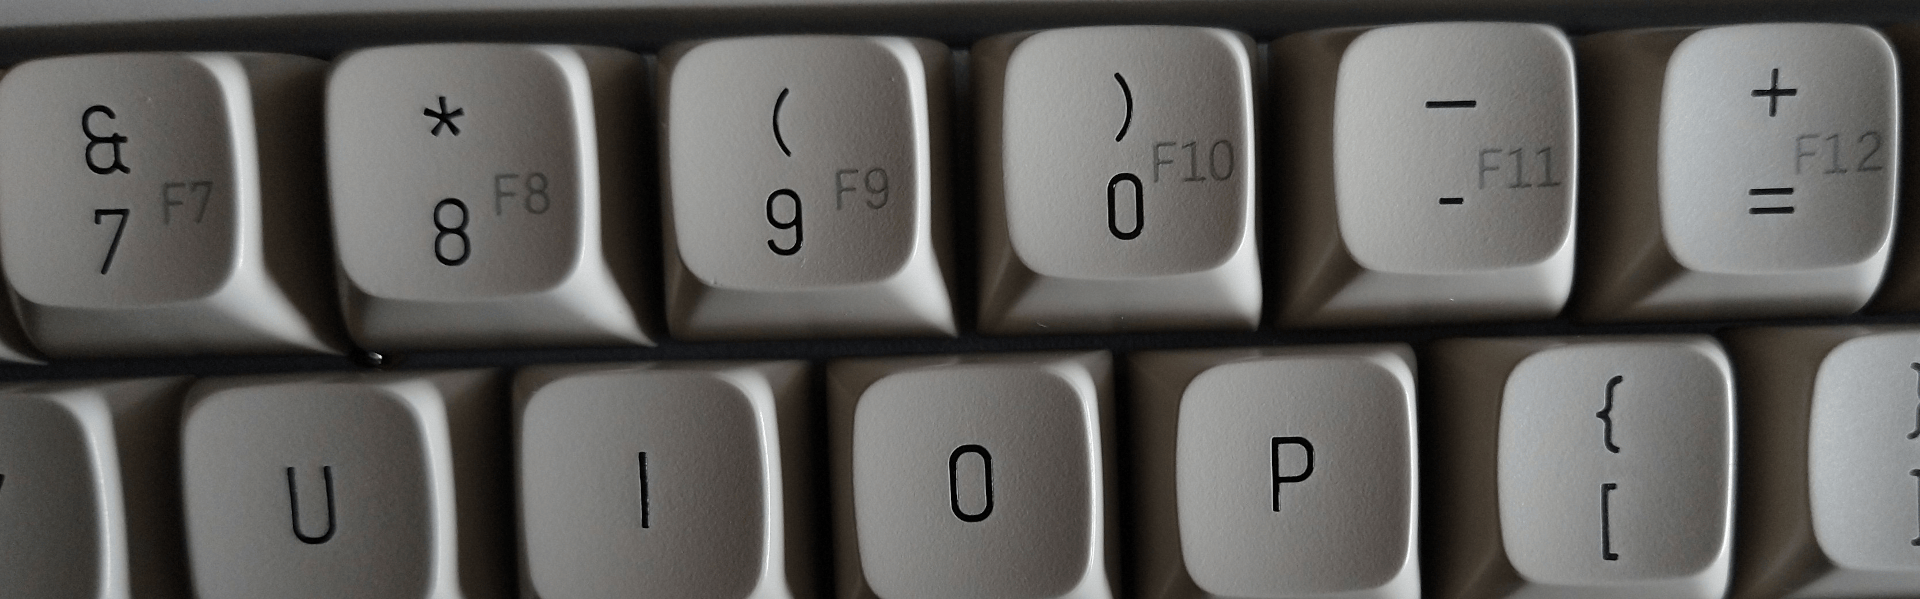 Zoomed picture of the keycaps in the number row with F keys misaligned